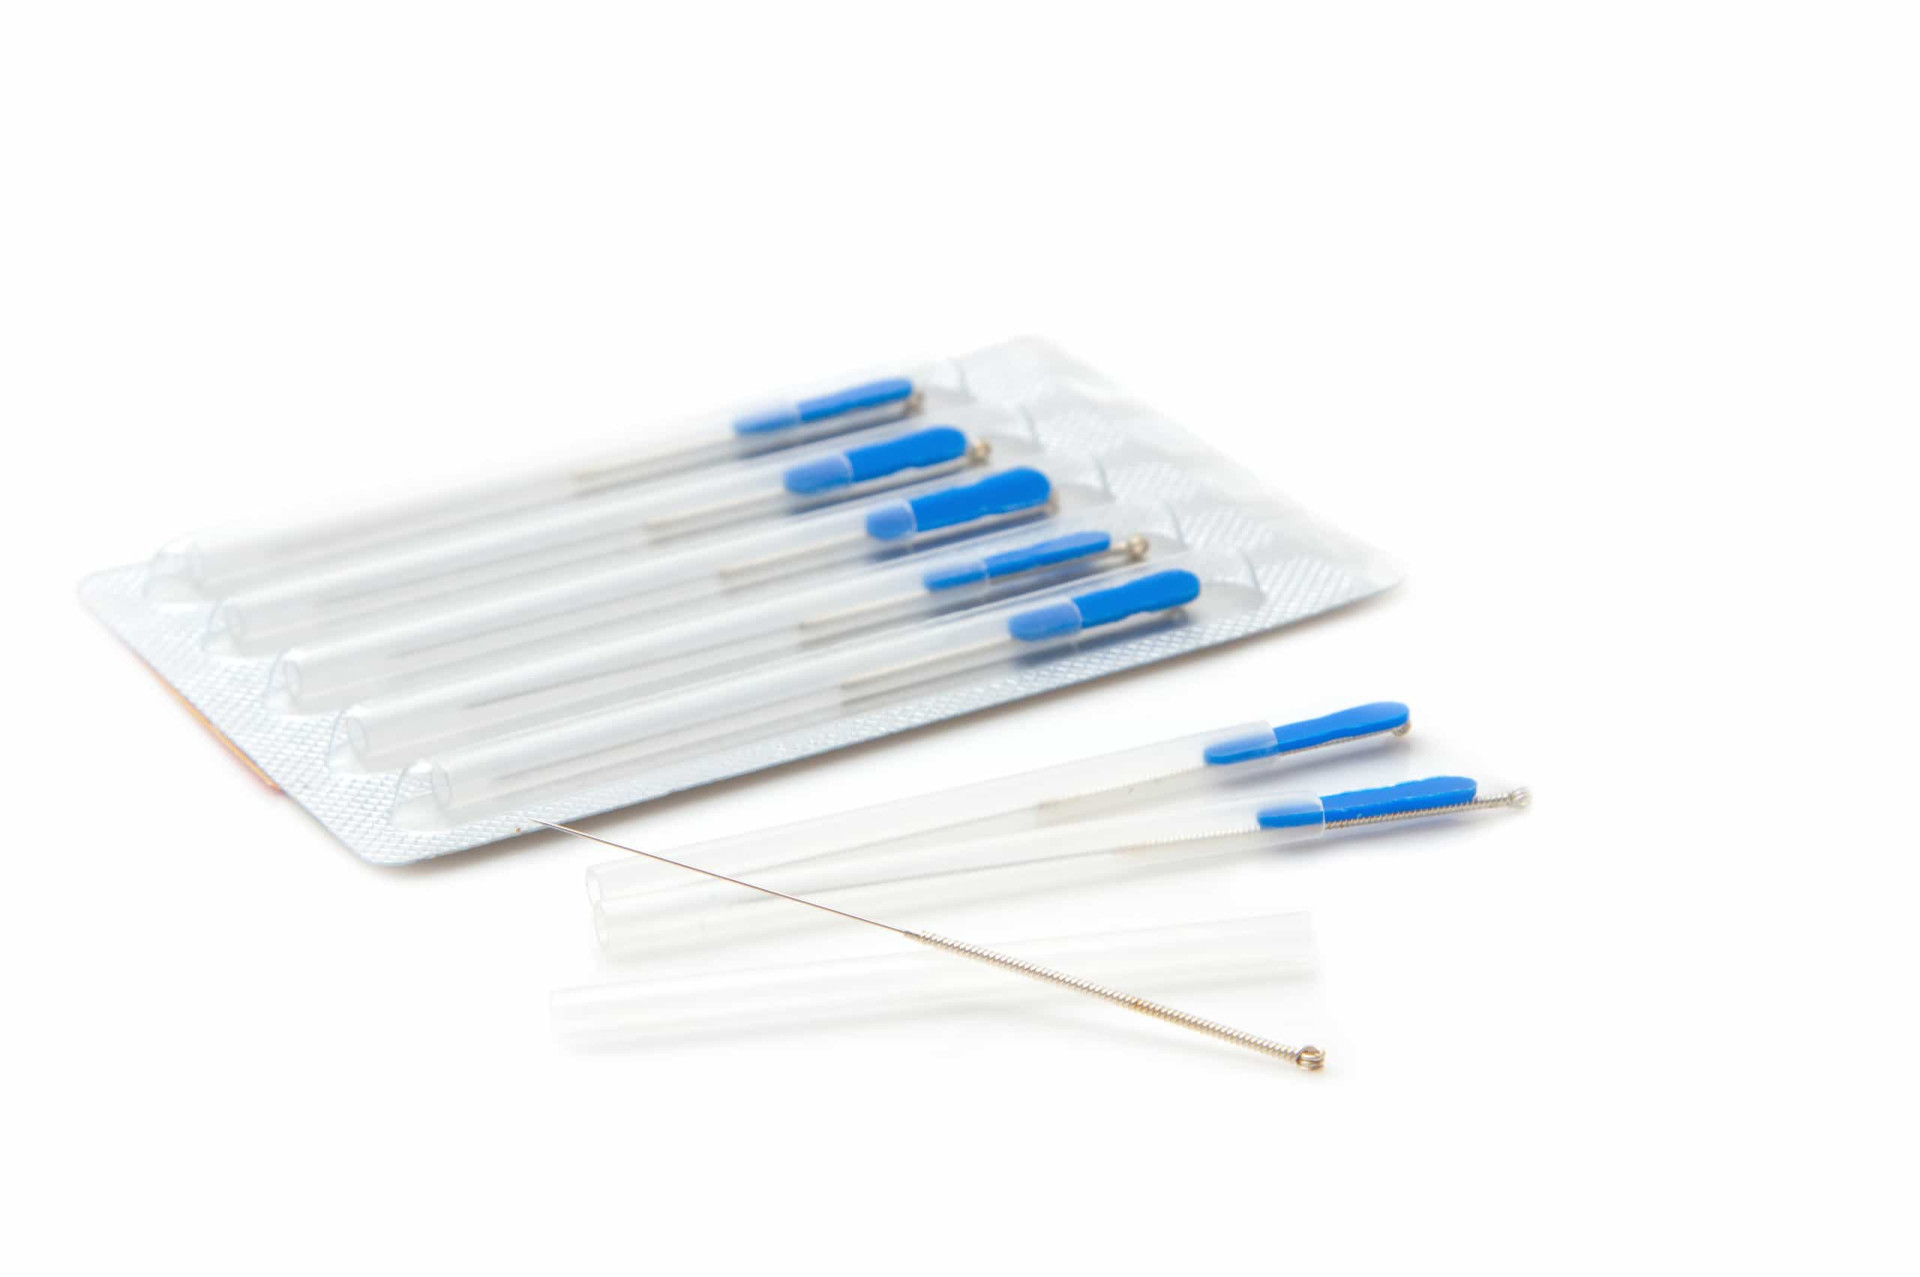 <p>Unlike the original needles, today's acupuncture needles are thin, sterile, and single-use. They're made of medical-grade stainless steel.</p><p>You may also like:<a href="https://www.starsinsider.com/n/456548?utm_source=msn.com&utm_medium=display&utm_campaign=referral_description&utm_content=509810en-us"> Celebrities who were professional dancers</a></p>